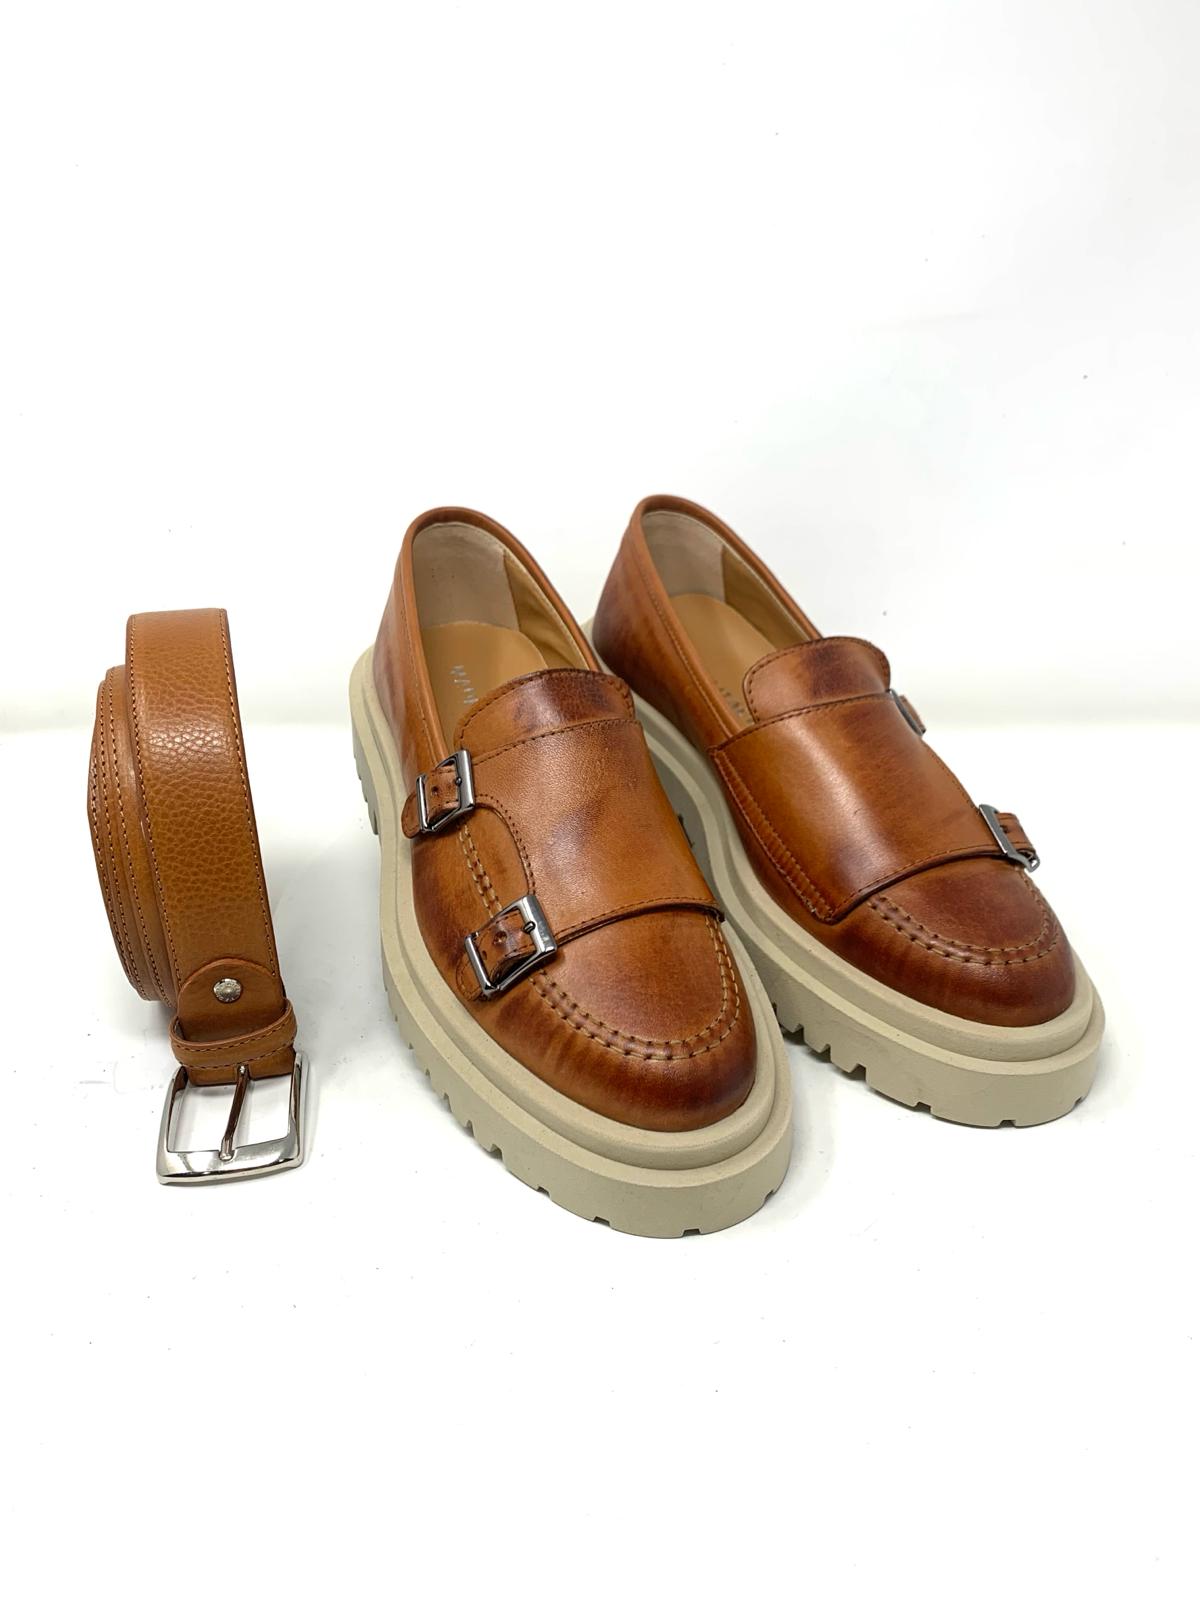 Rock climbing moccasin double buckle amber bottom real leather made in Italy